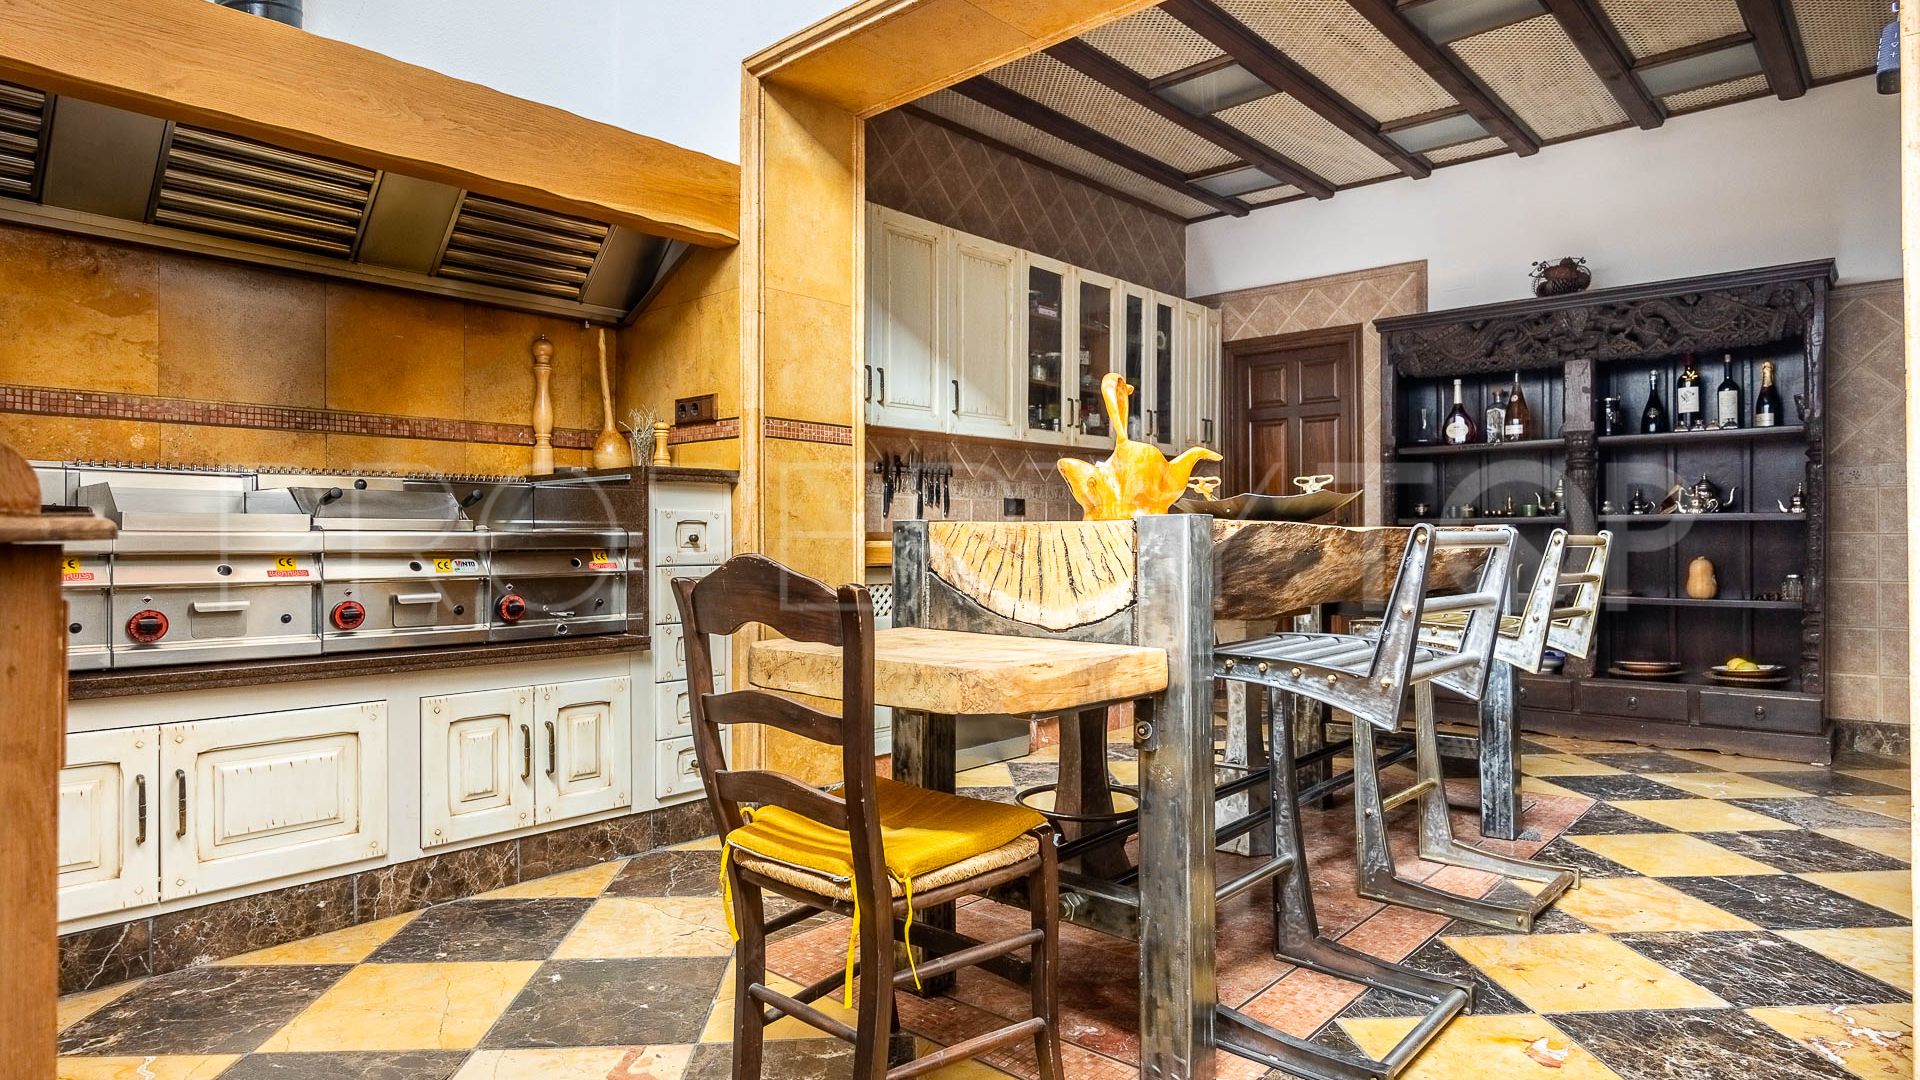 4 bedrooms chalet in Ronda for sale